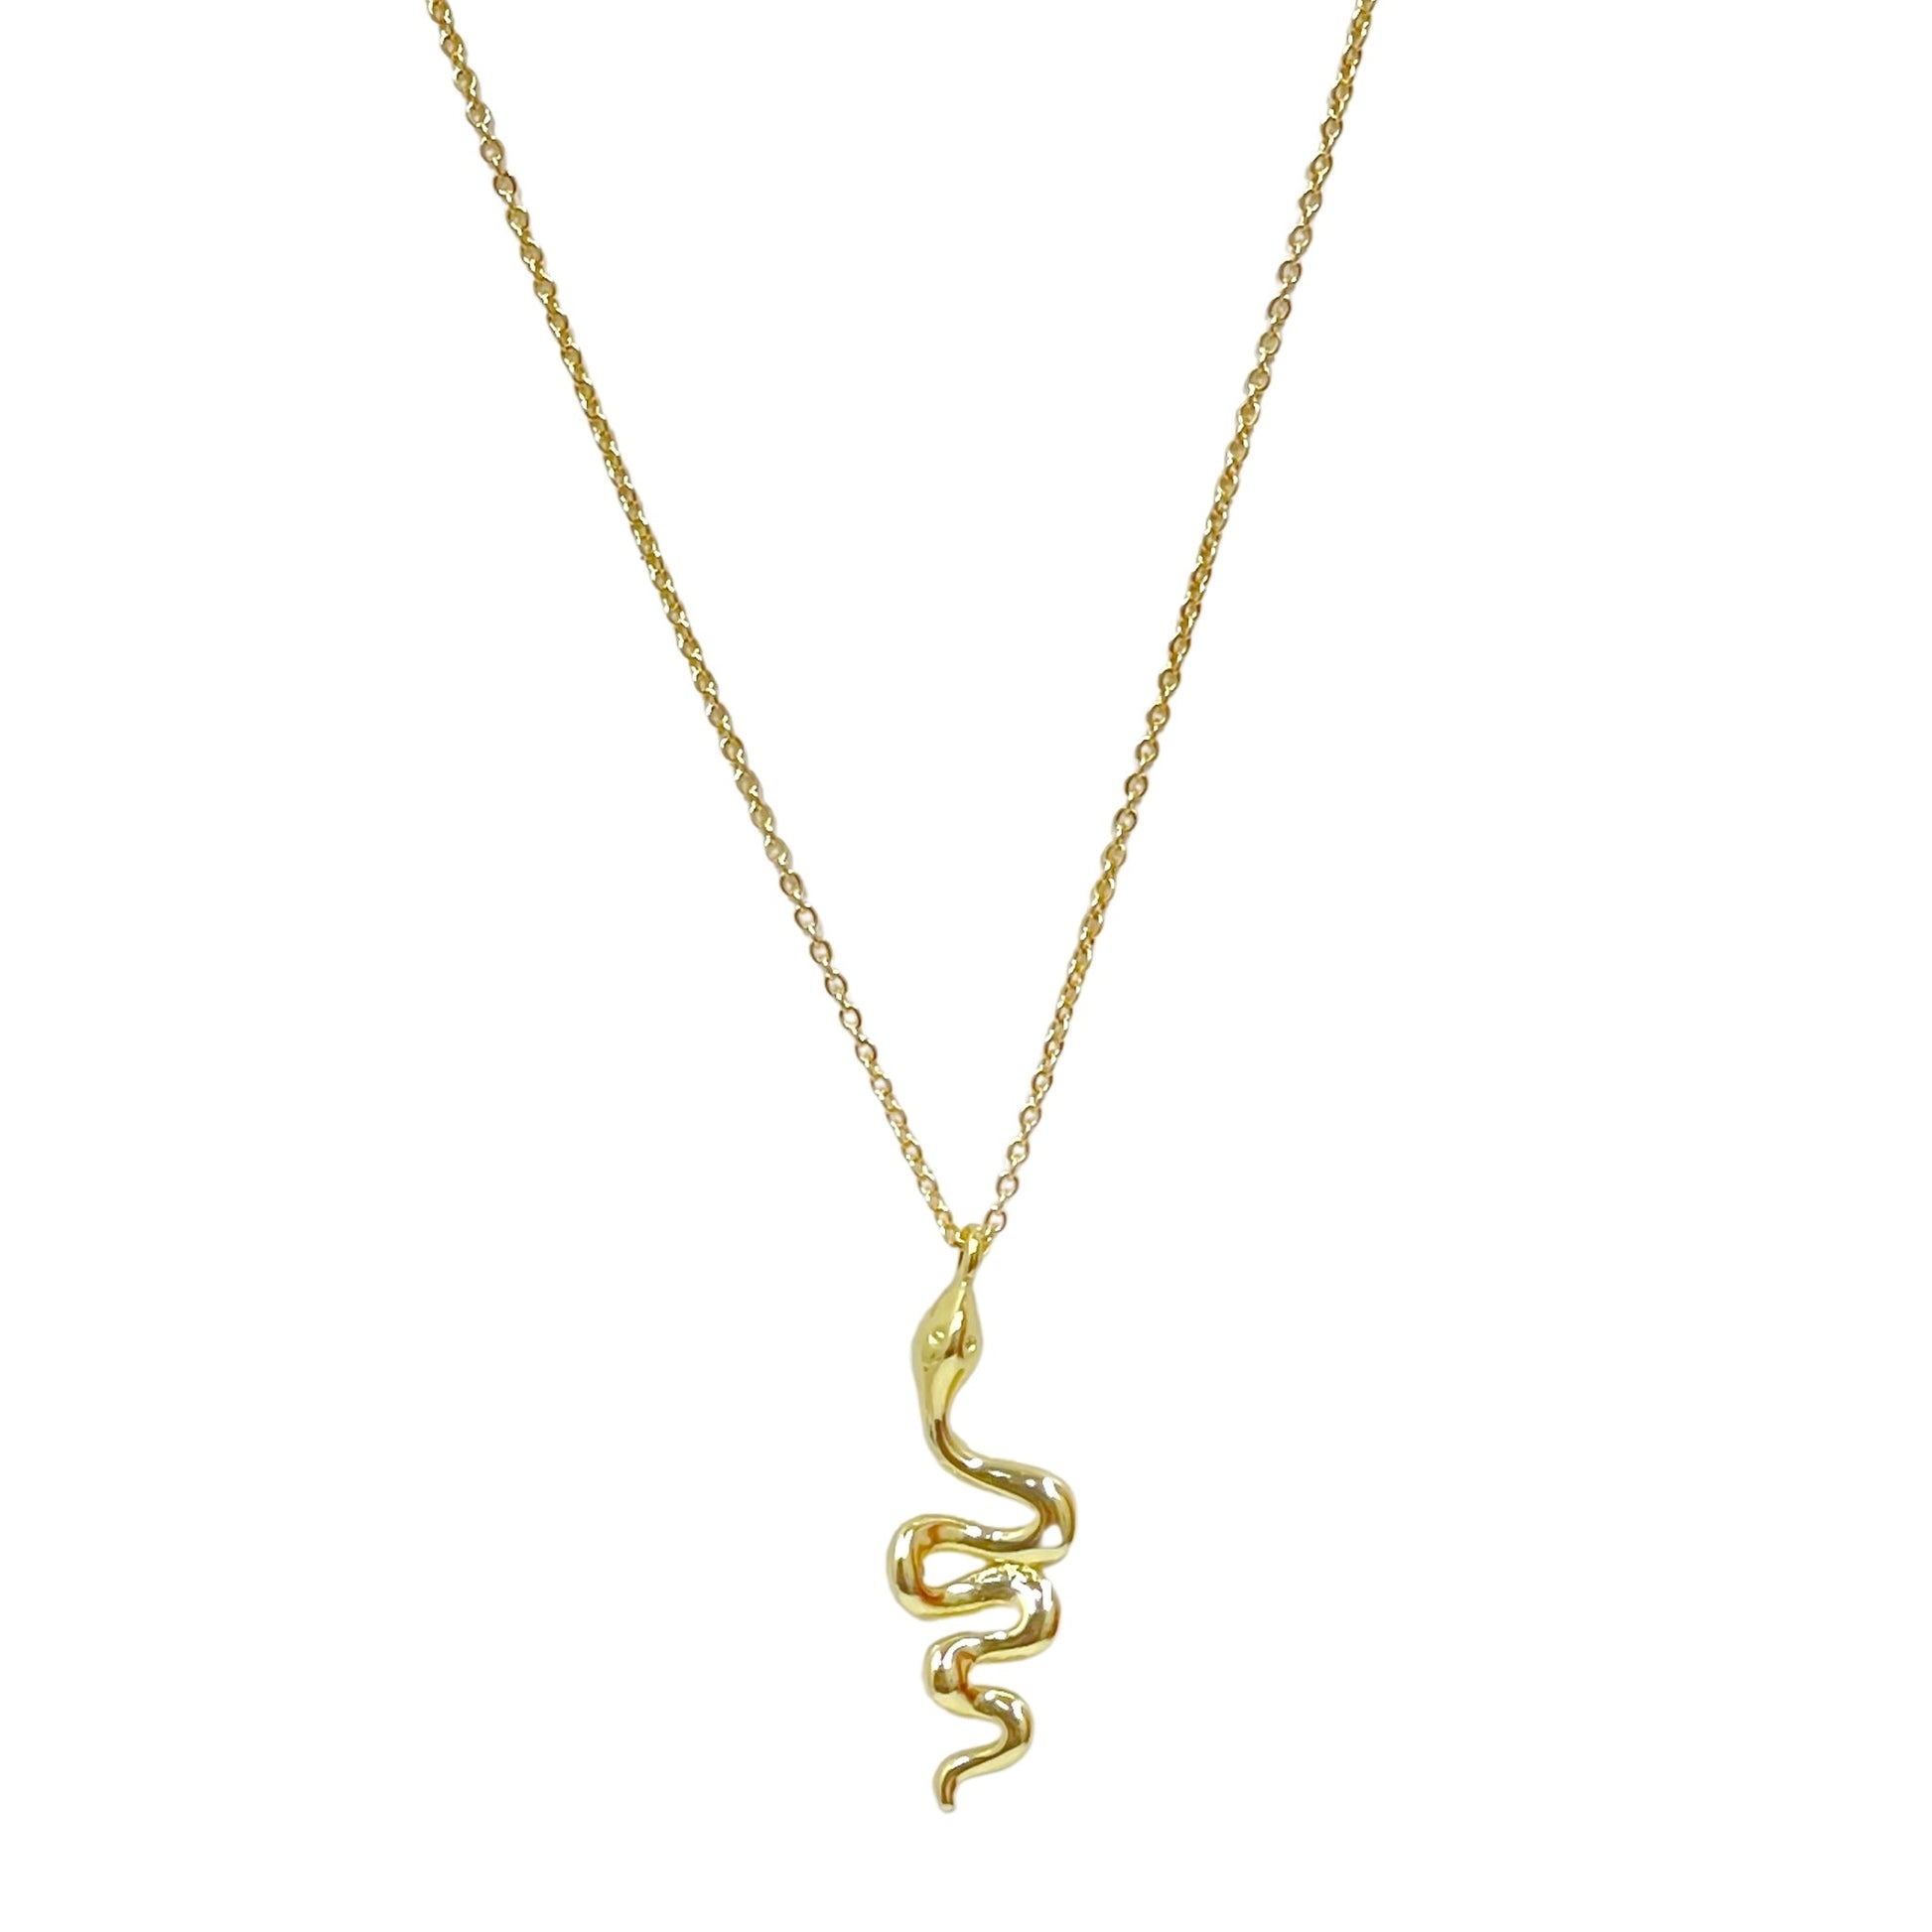 Mini Gold Serpent Necklace - Sunday Girl by Amy DiLamarraNecklace